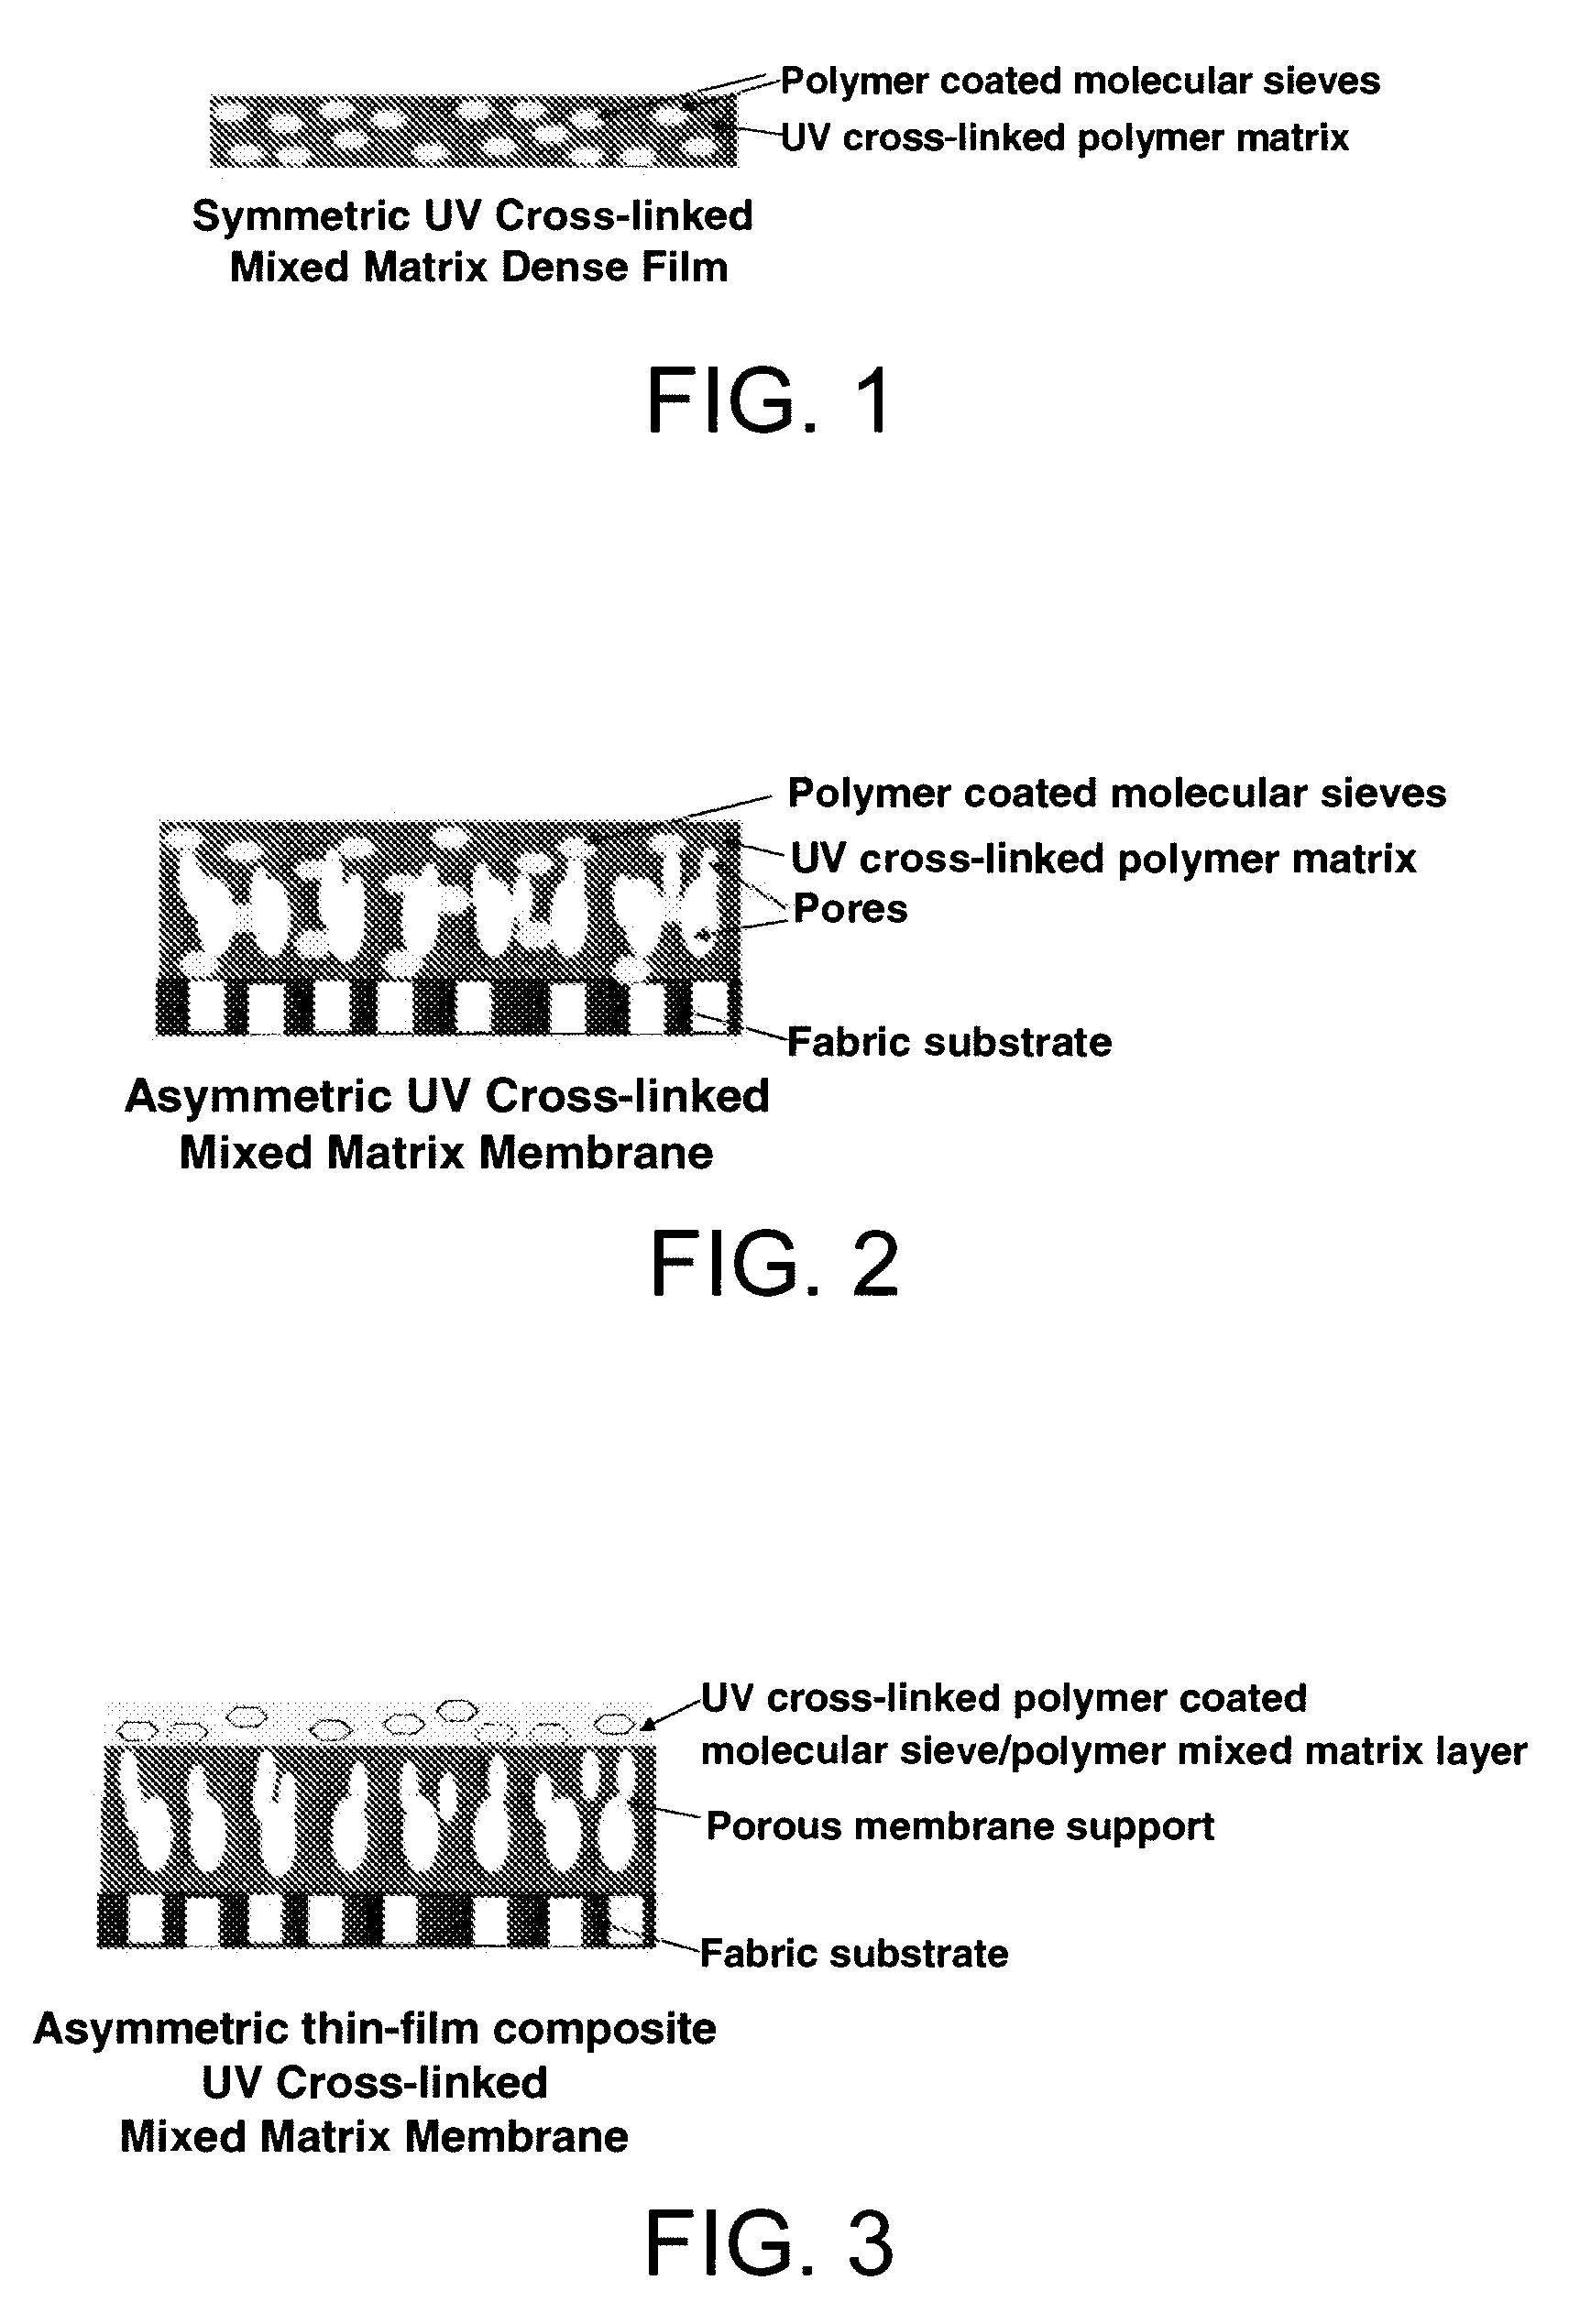 UV cross-linked polymer functionalized molecular sieve/polymer mixed matrix membranes for sulfur reduction